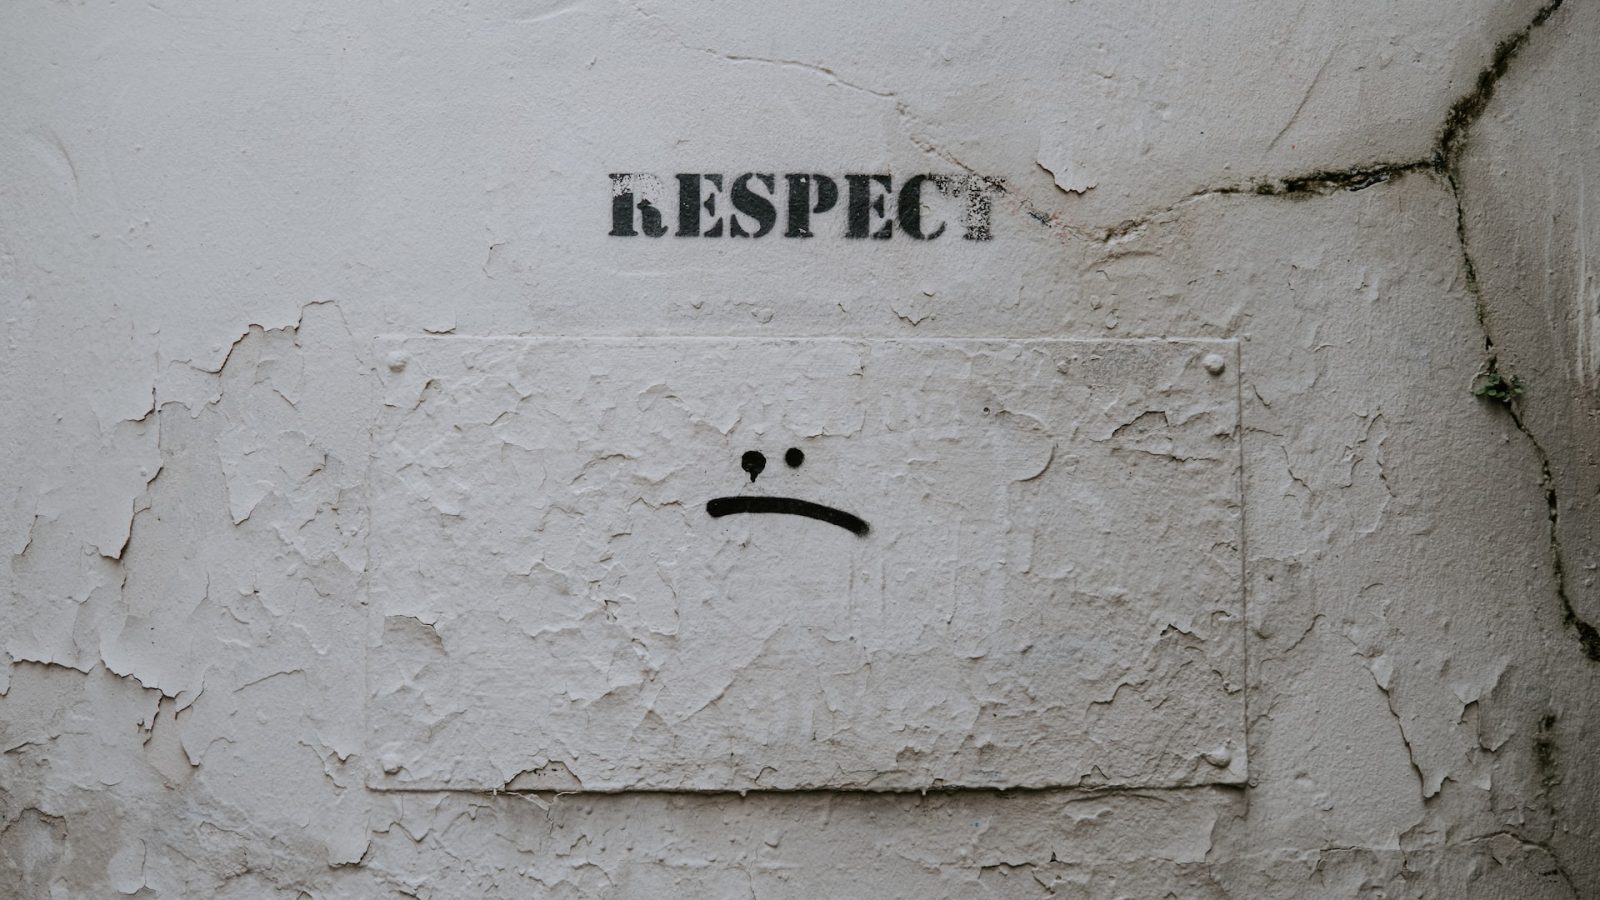 Wall showing graffiti that reads "respect" with a sad face below it